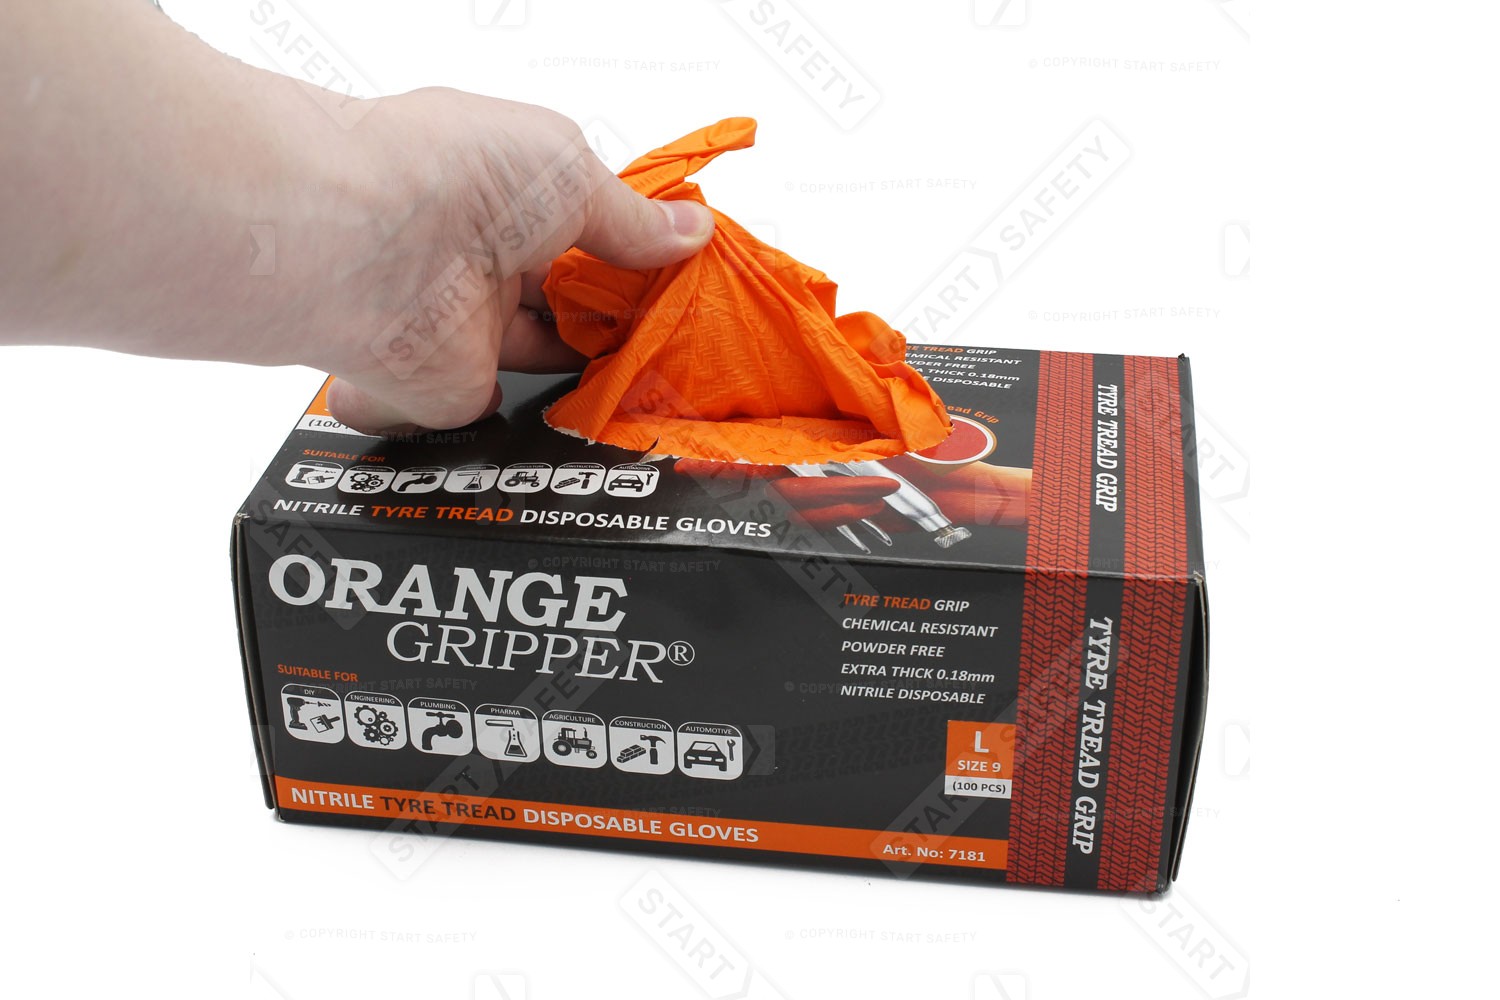 A Pack Of SW Orange Gripper Gloves Contains 50 Pairs Of High Traction Gloves